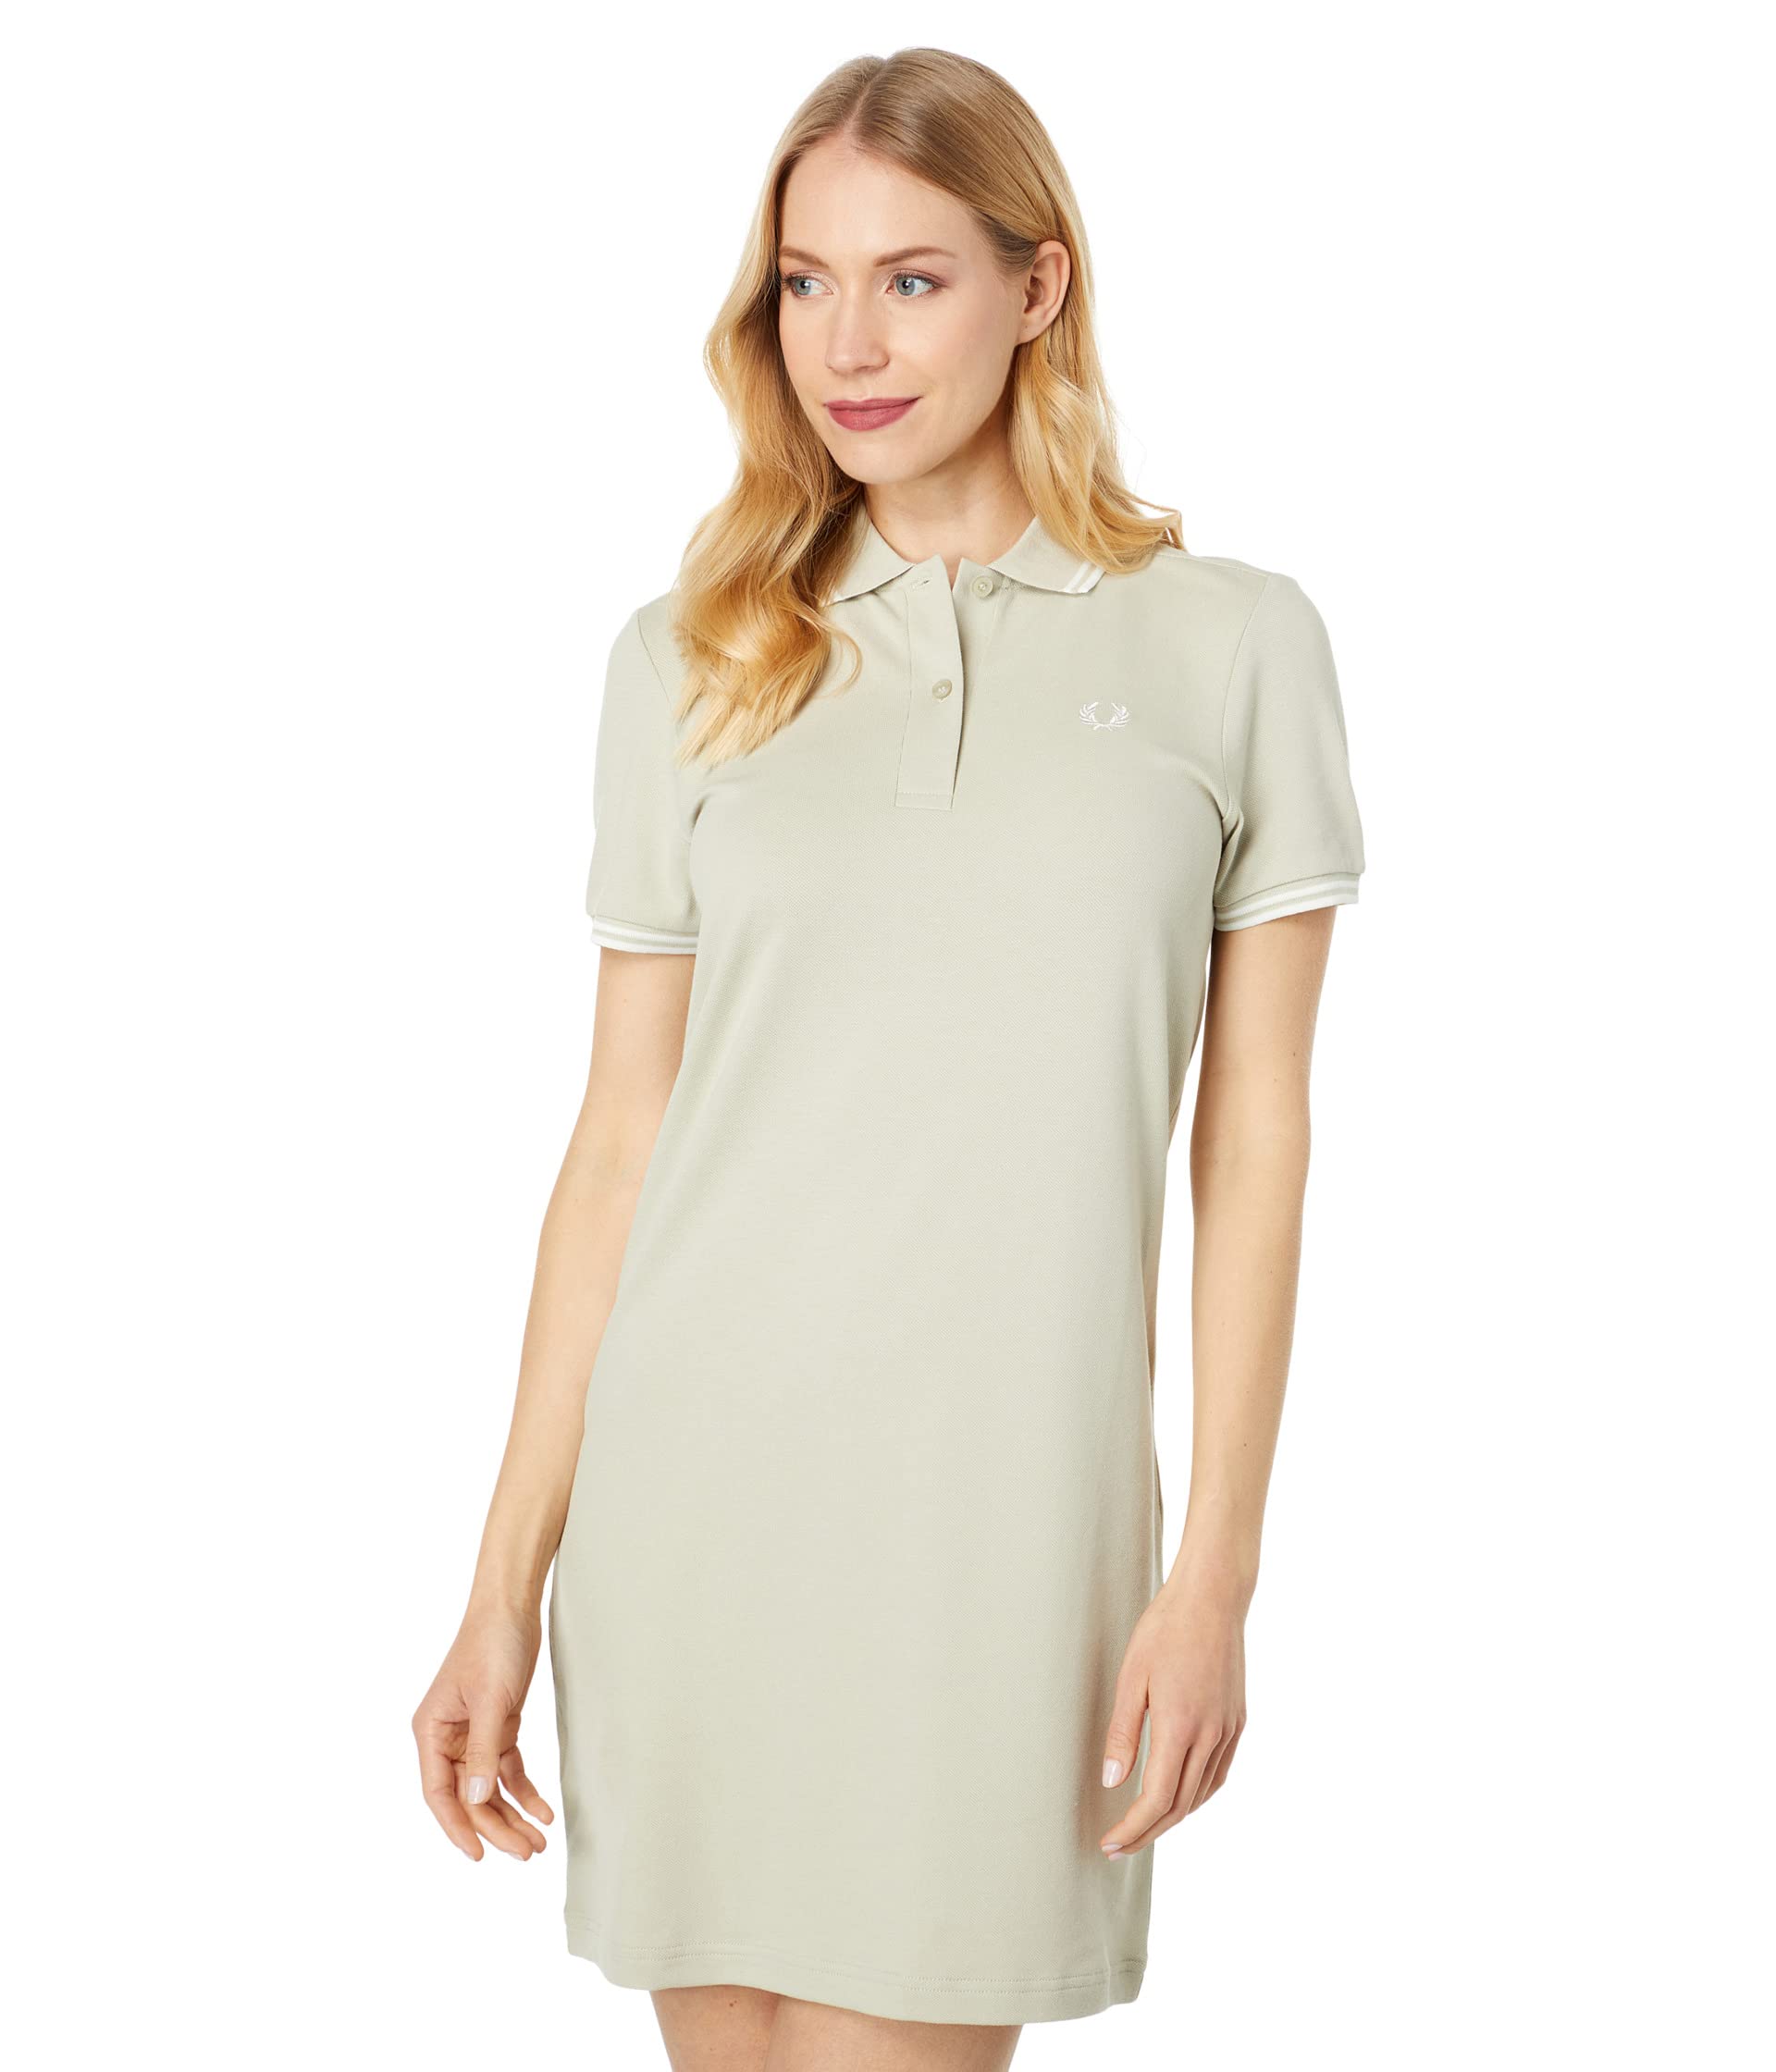 Платье Fred Perry, Twin Tipped Fred Perry Dress футболка fred perry authentic twin tipped бордовый